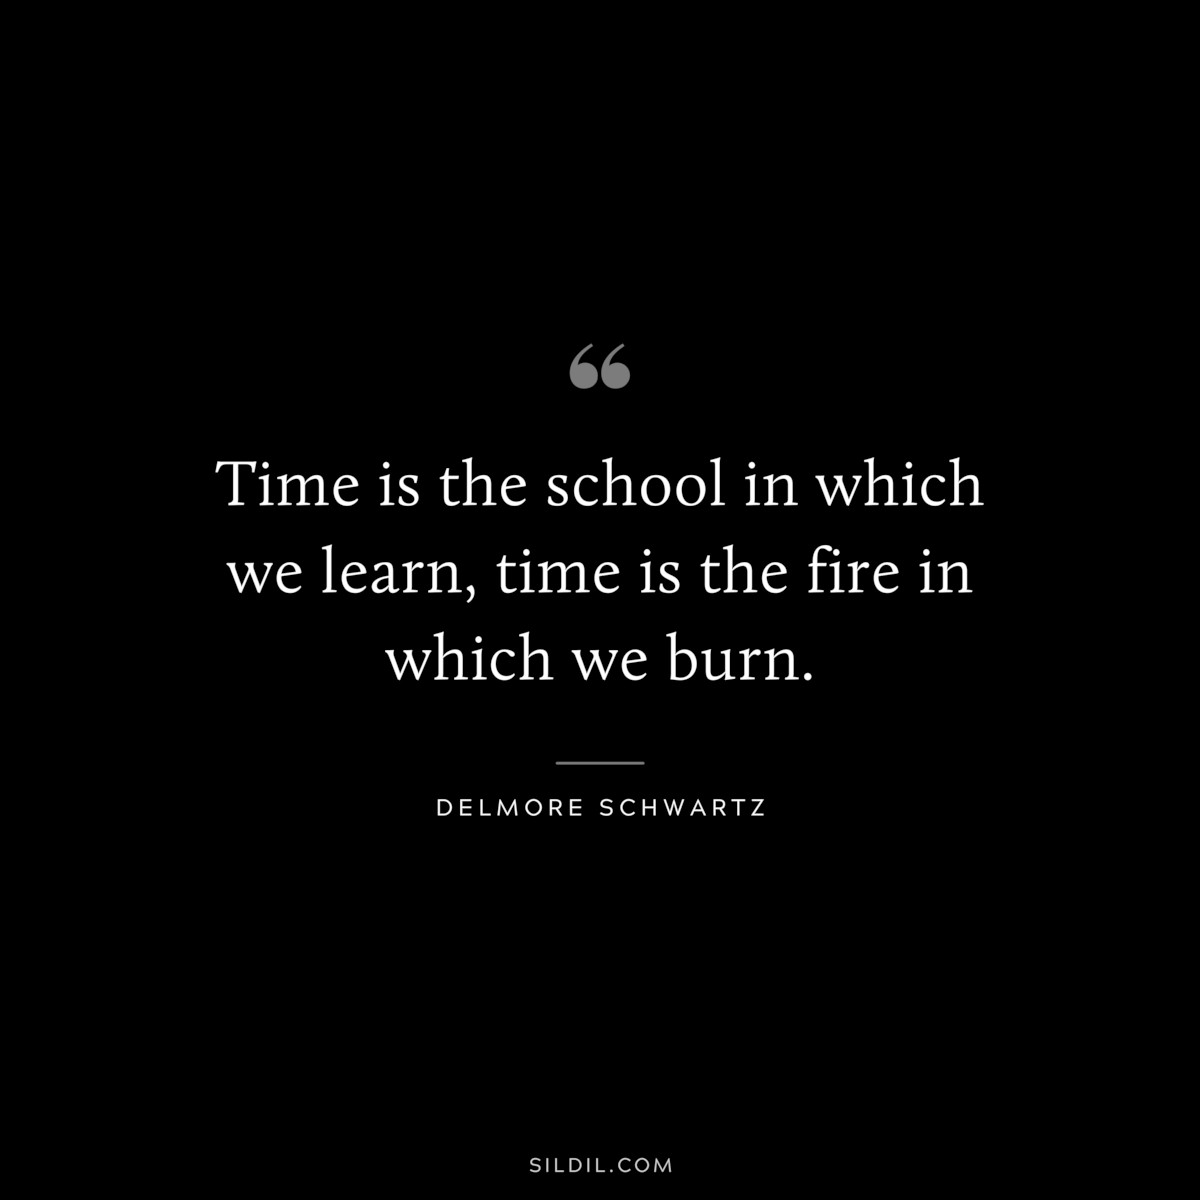 Time is the school in which we learn, time is the fire in which we burn. ― Delmore Schwartz